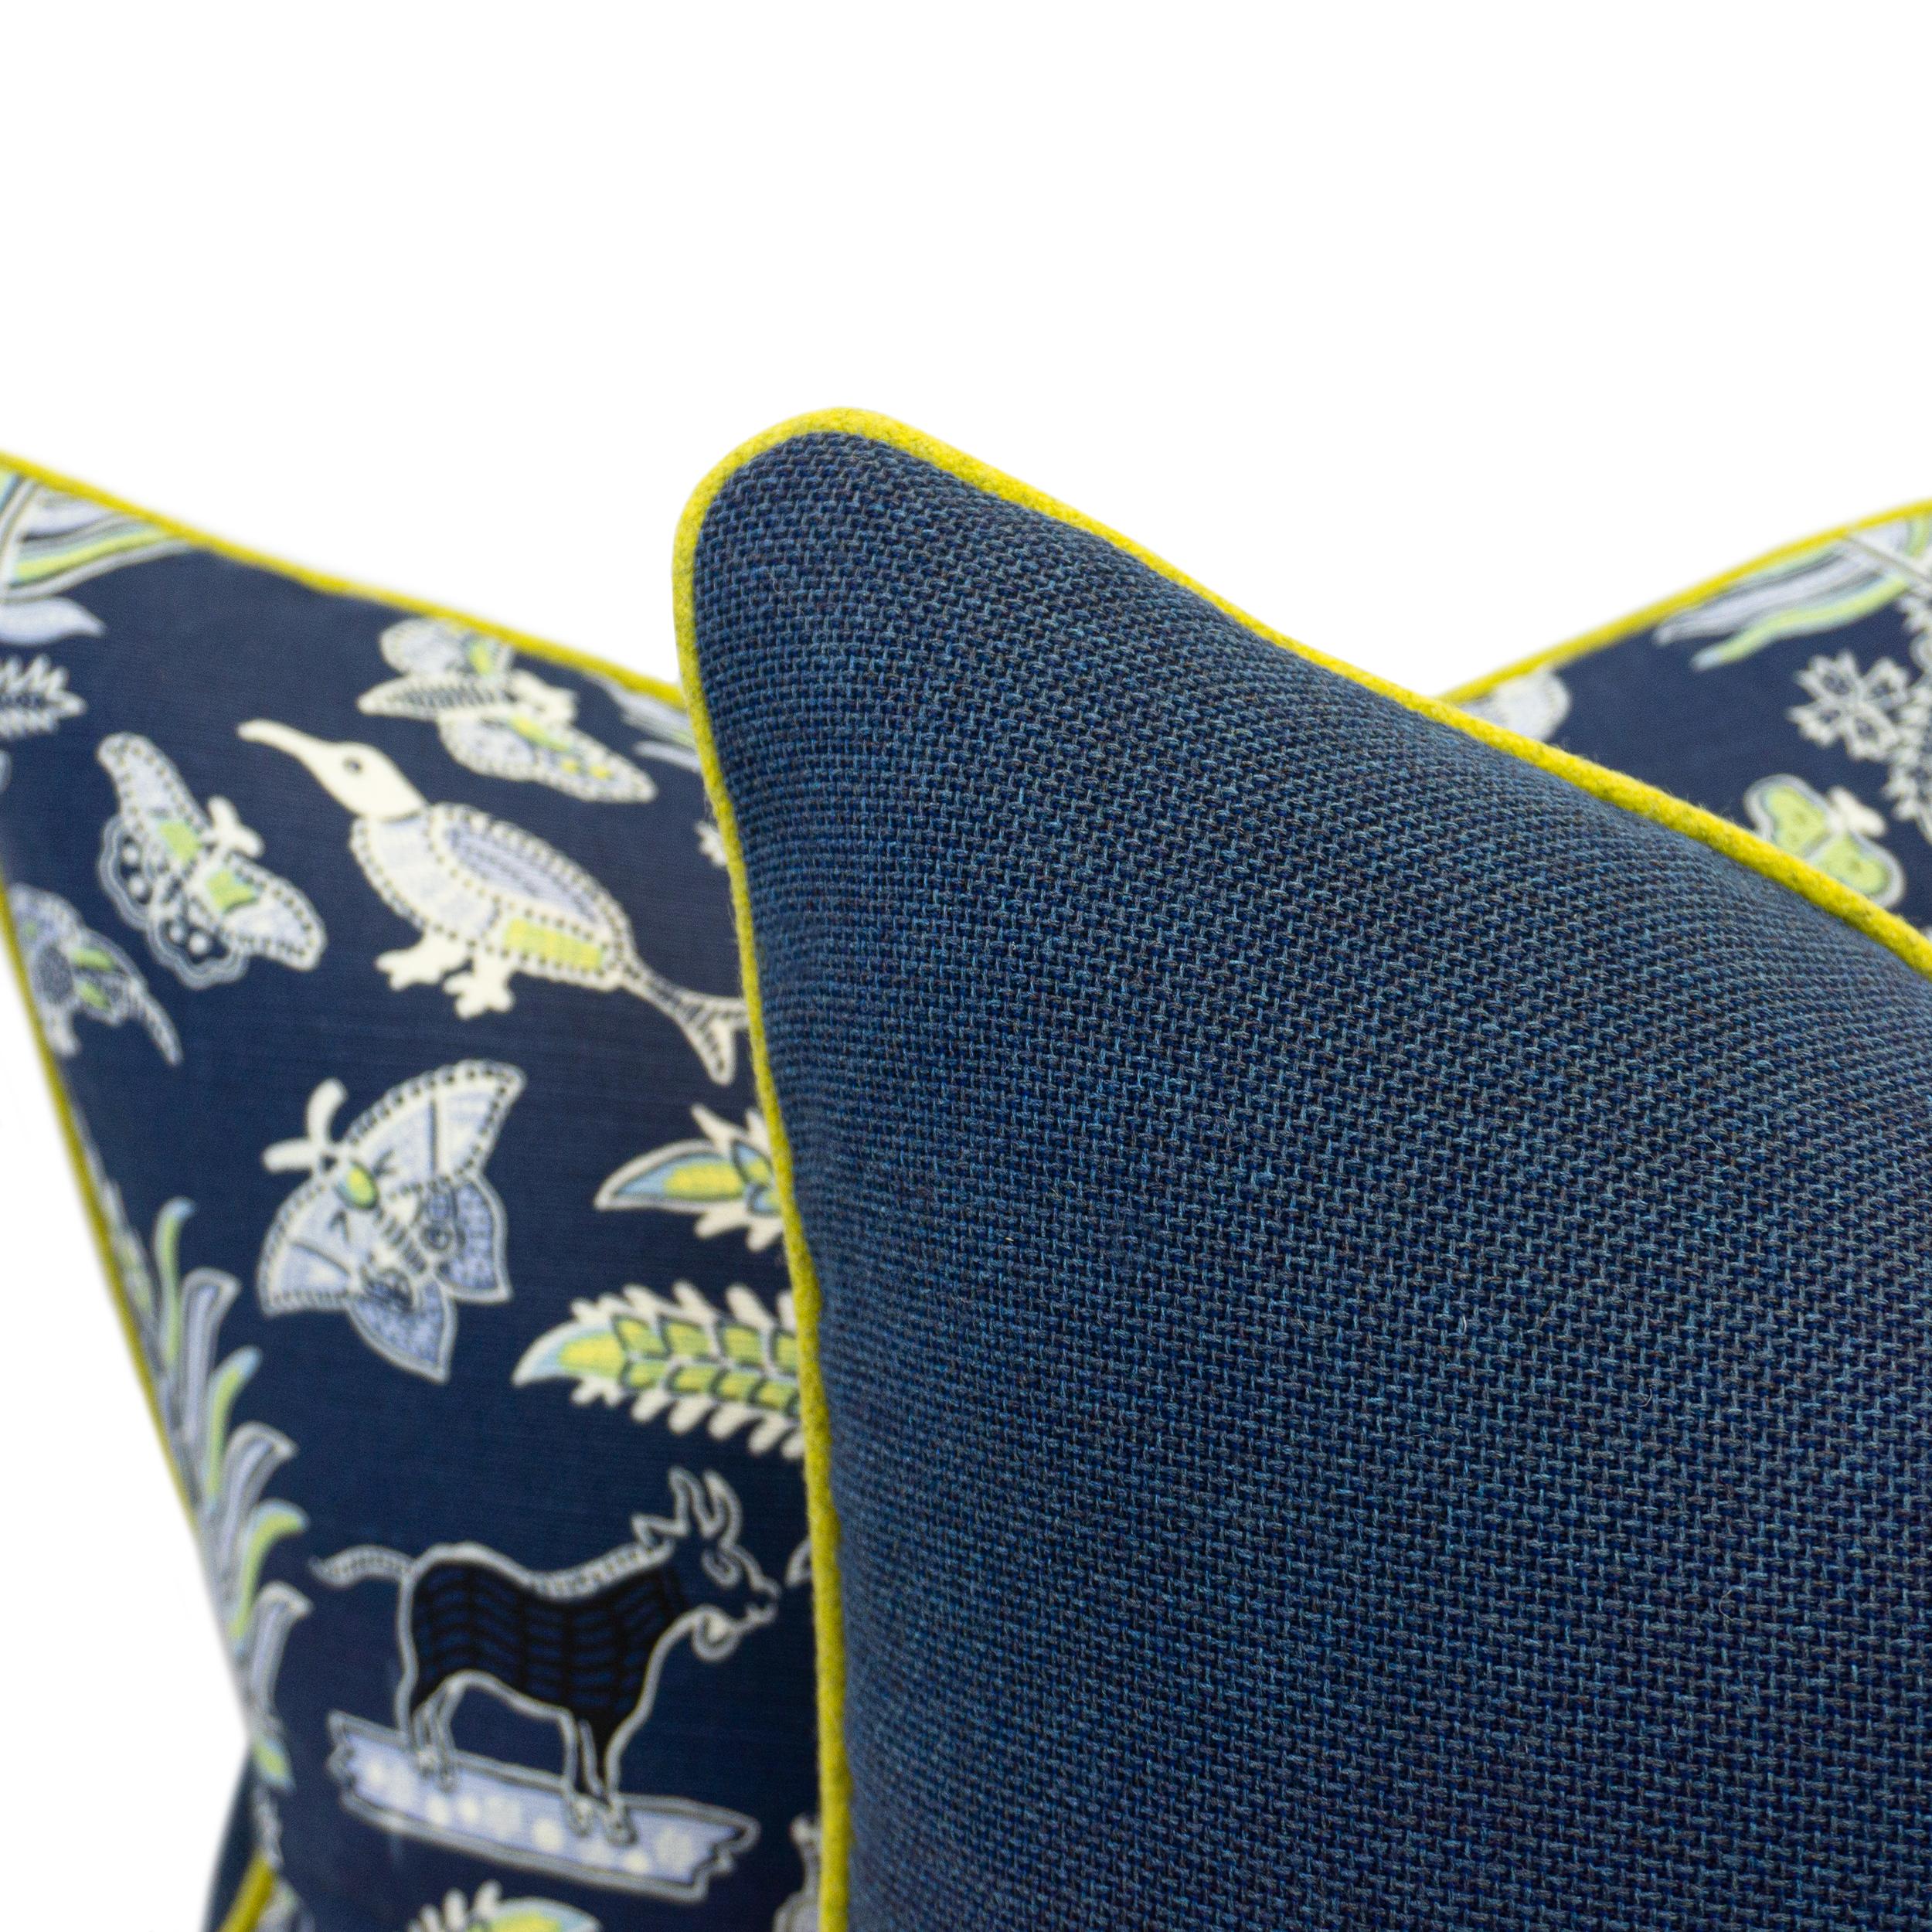 Contemporary Navy Blue Printed Linen Fabric with Yellow Trim Square Pillows For Sale